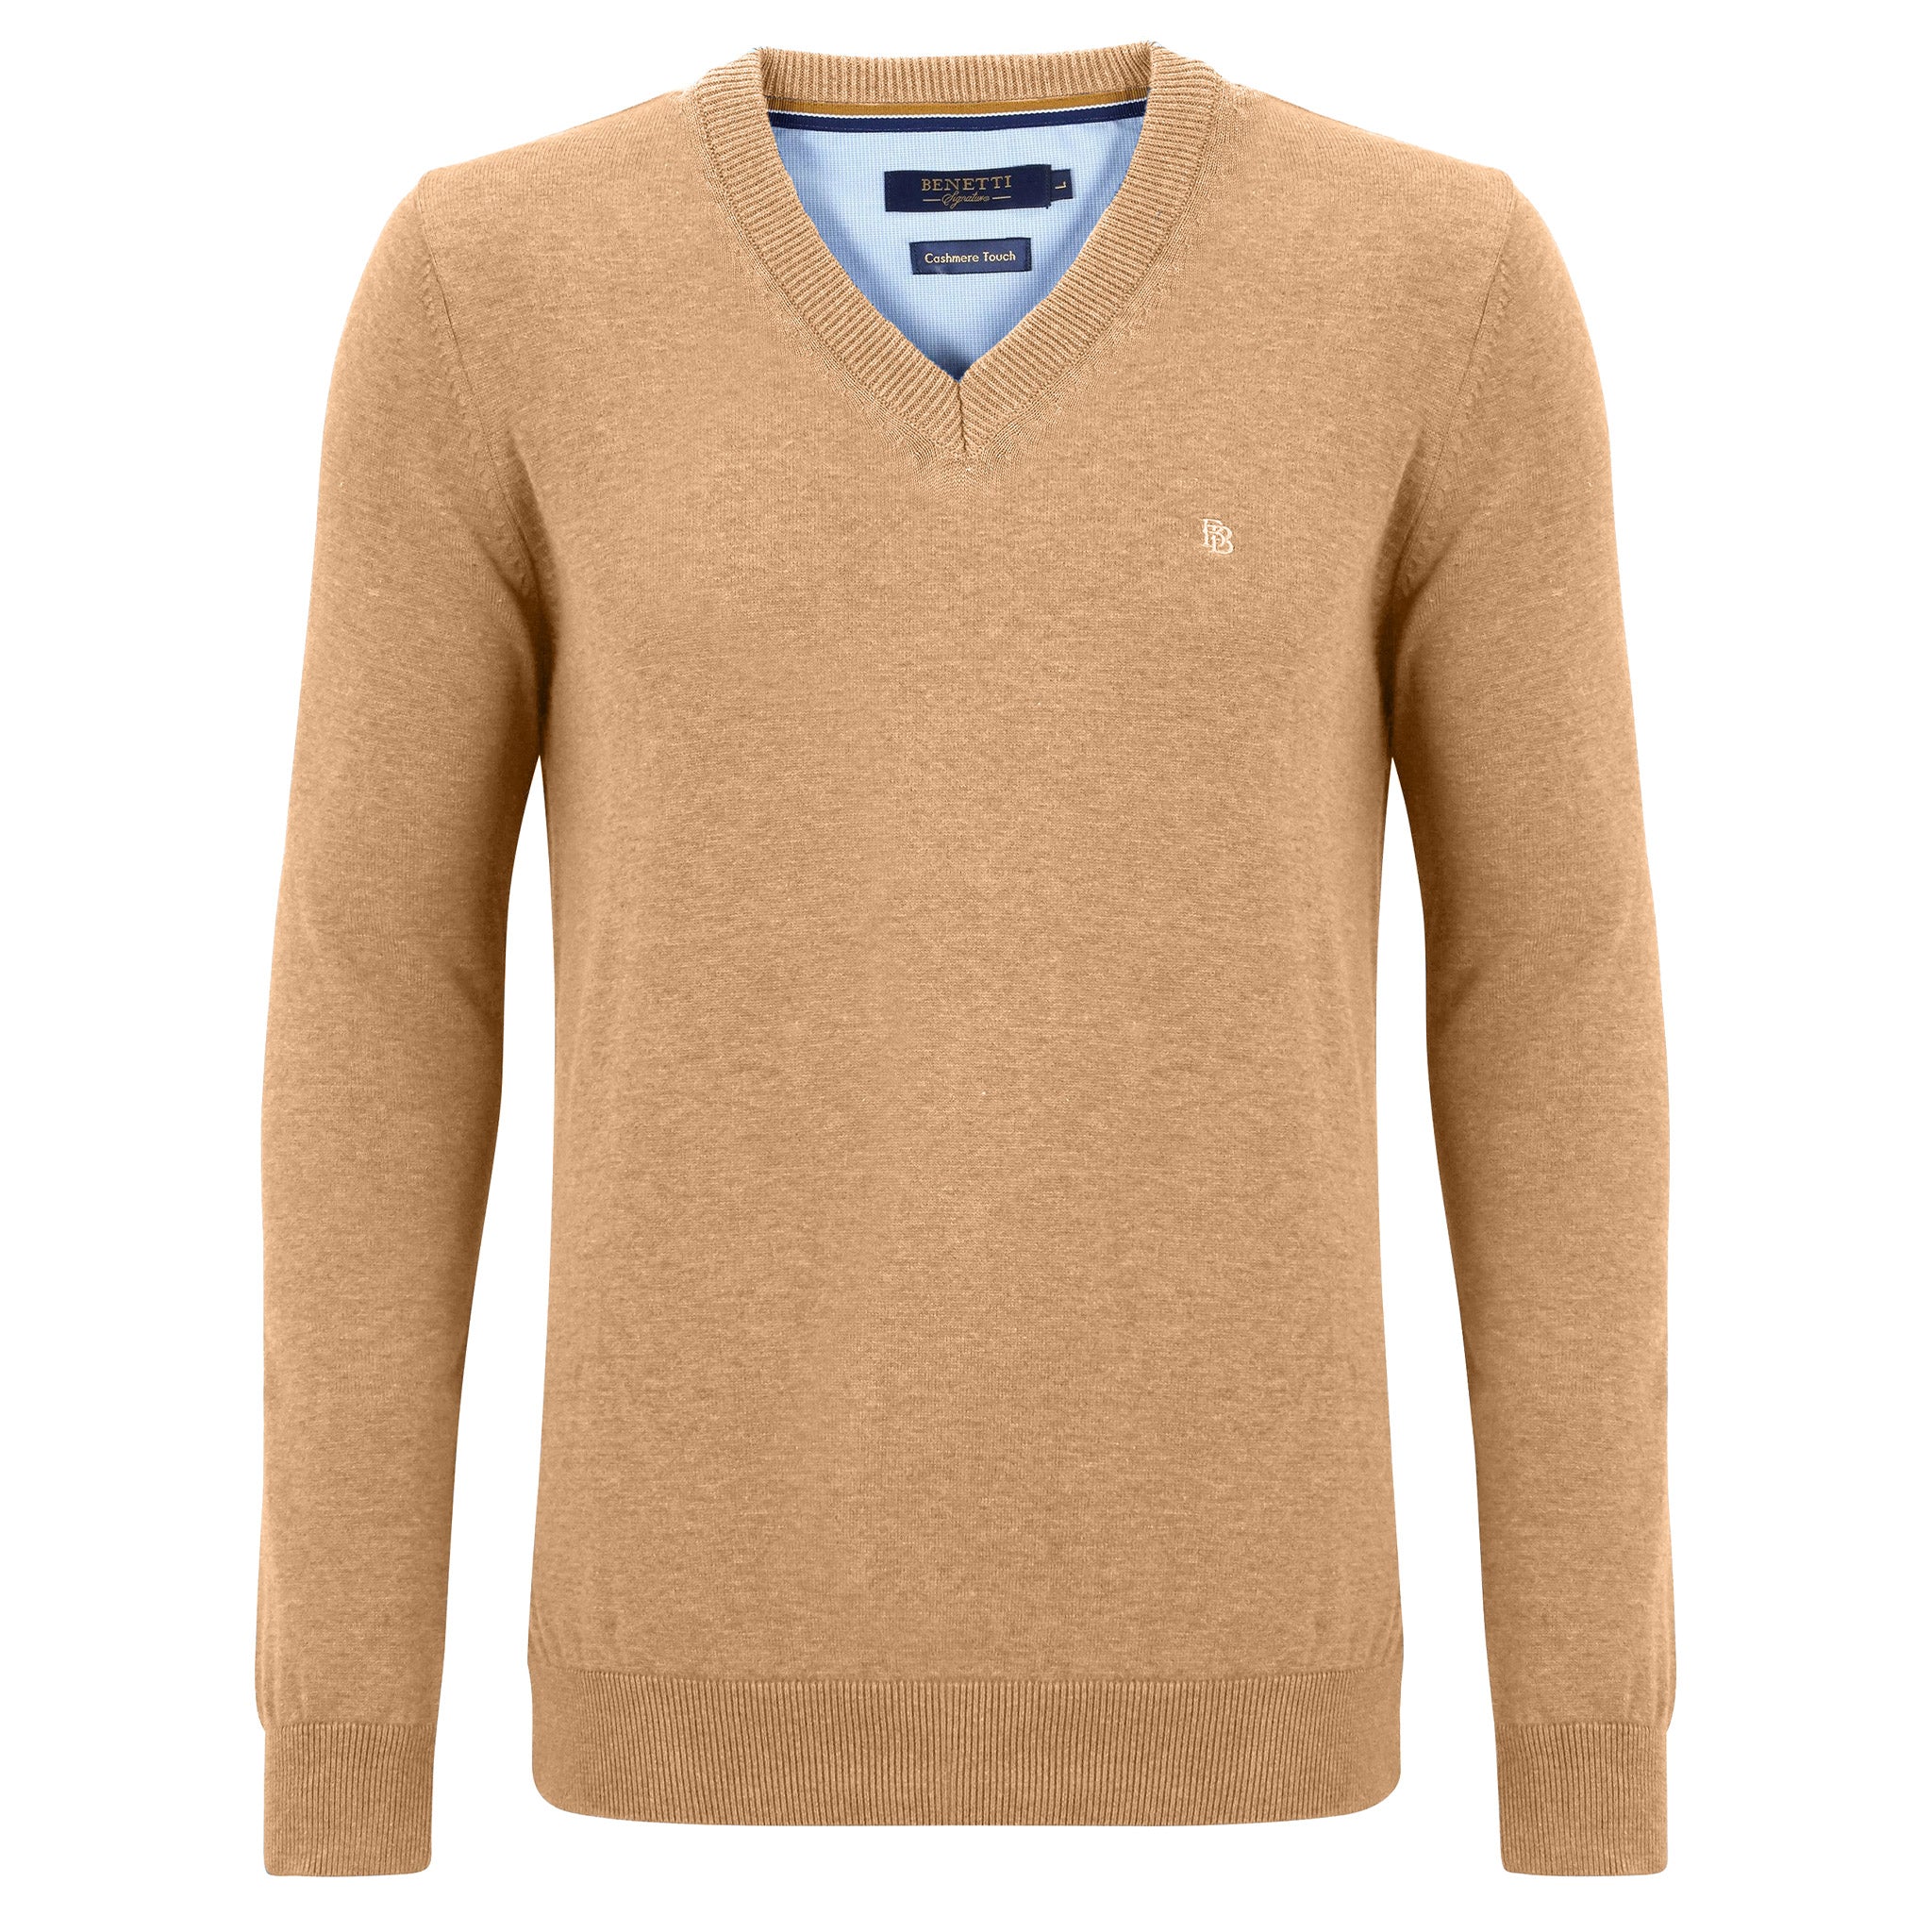 Benetti V Neck 100% Cotton Knitwear in Biscuit